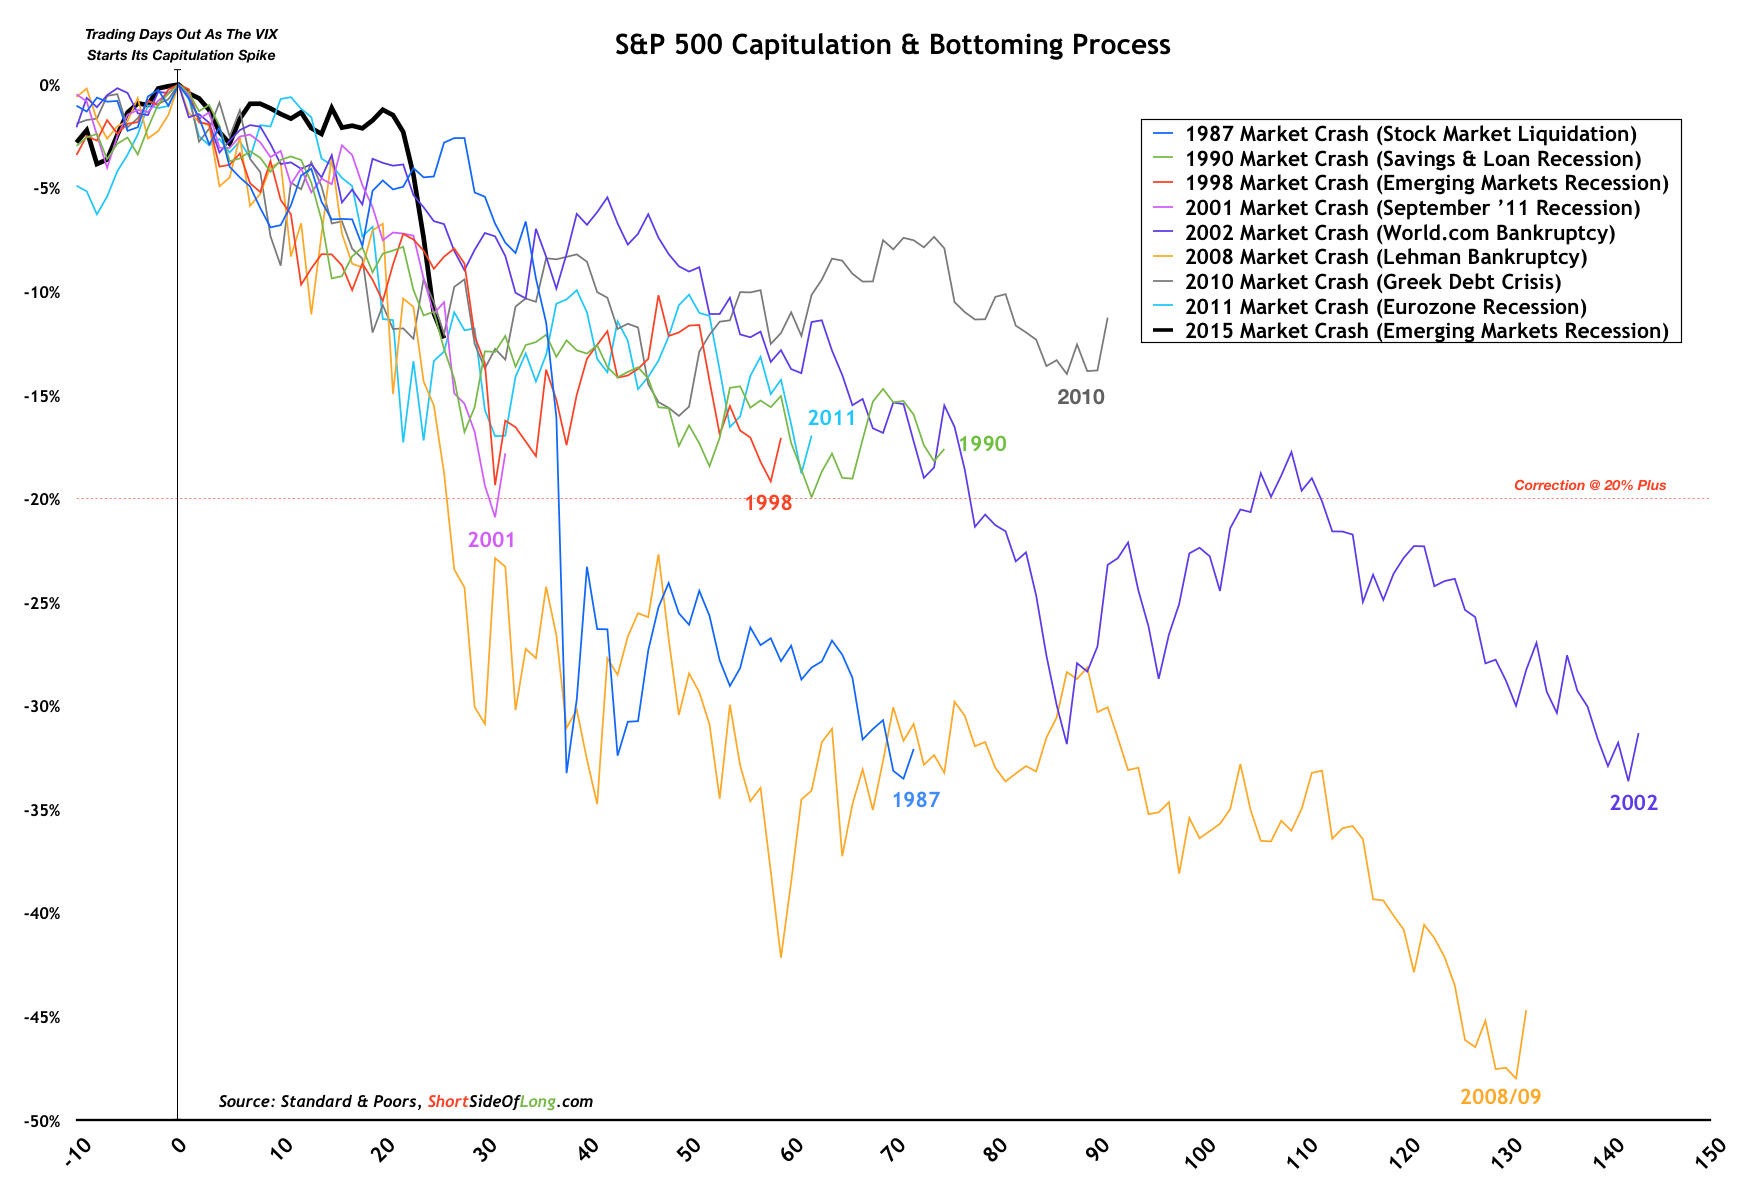 SPX Capitulation and Bottoming Process 1987-2015